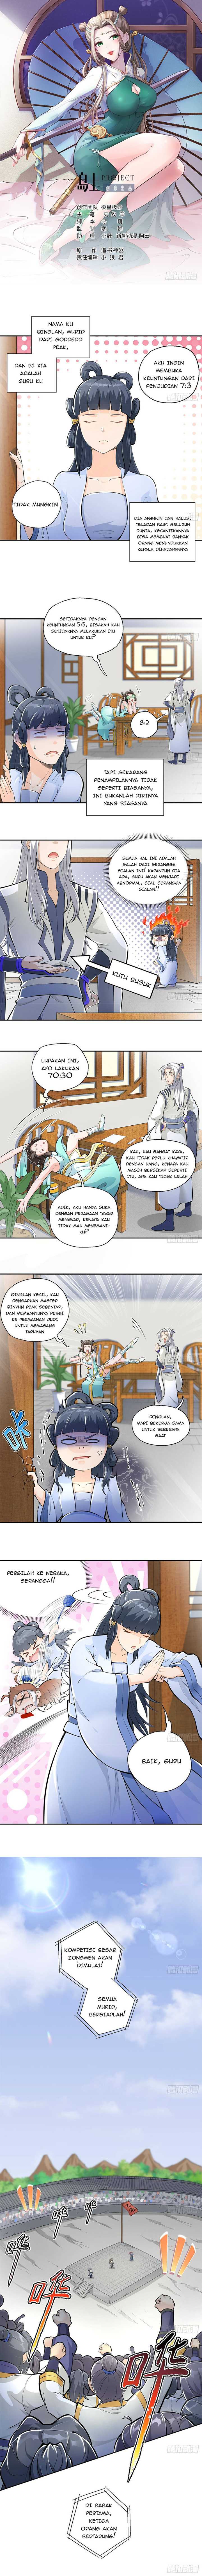 Cultivation Through Science Chapter 4